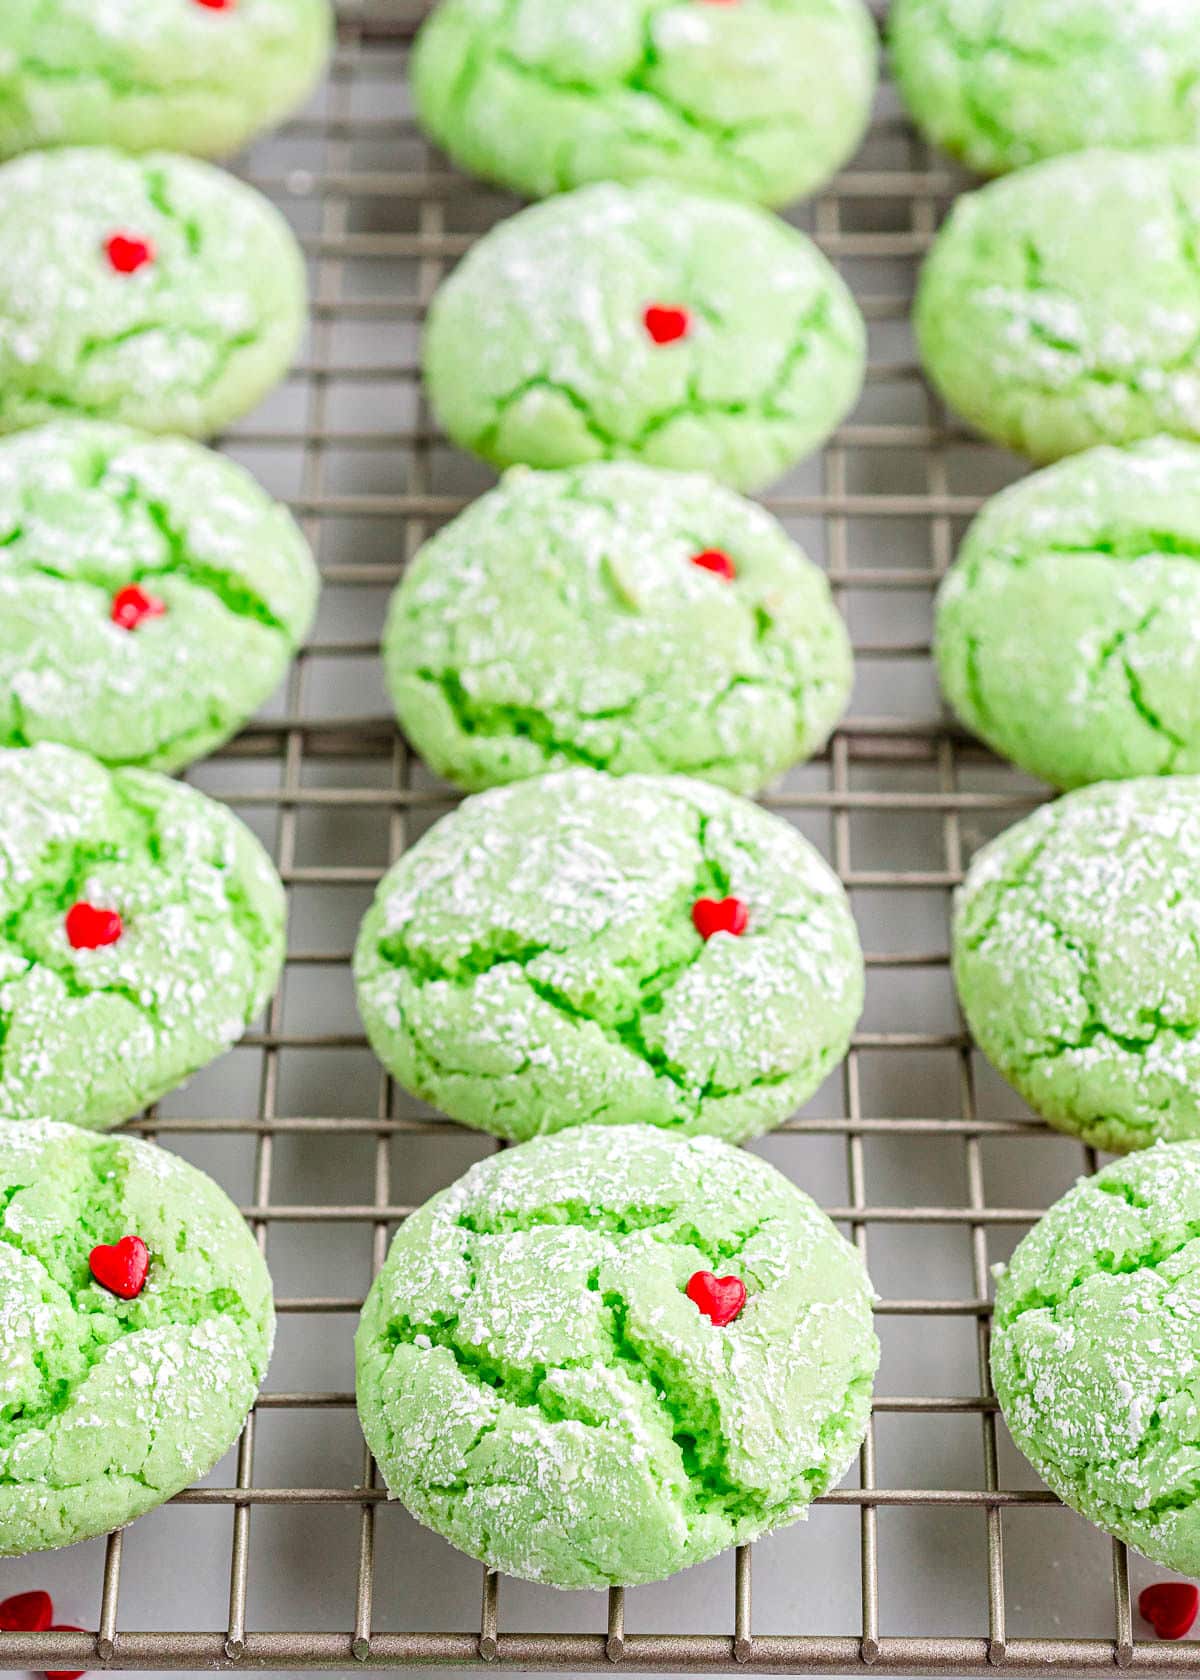 https://www.momontimeout.com/wp-content/uploads/2021/12/grinch-cookies-cooling-rack.jpeg